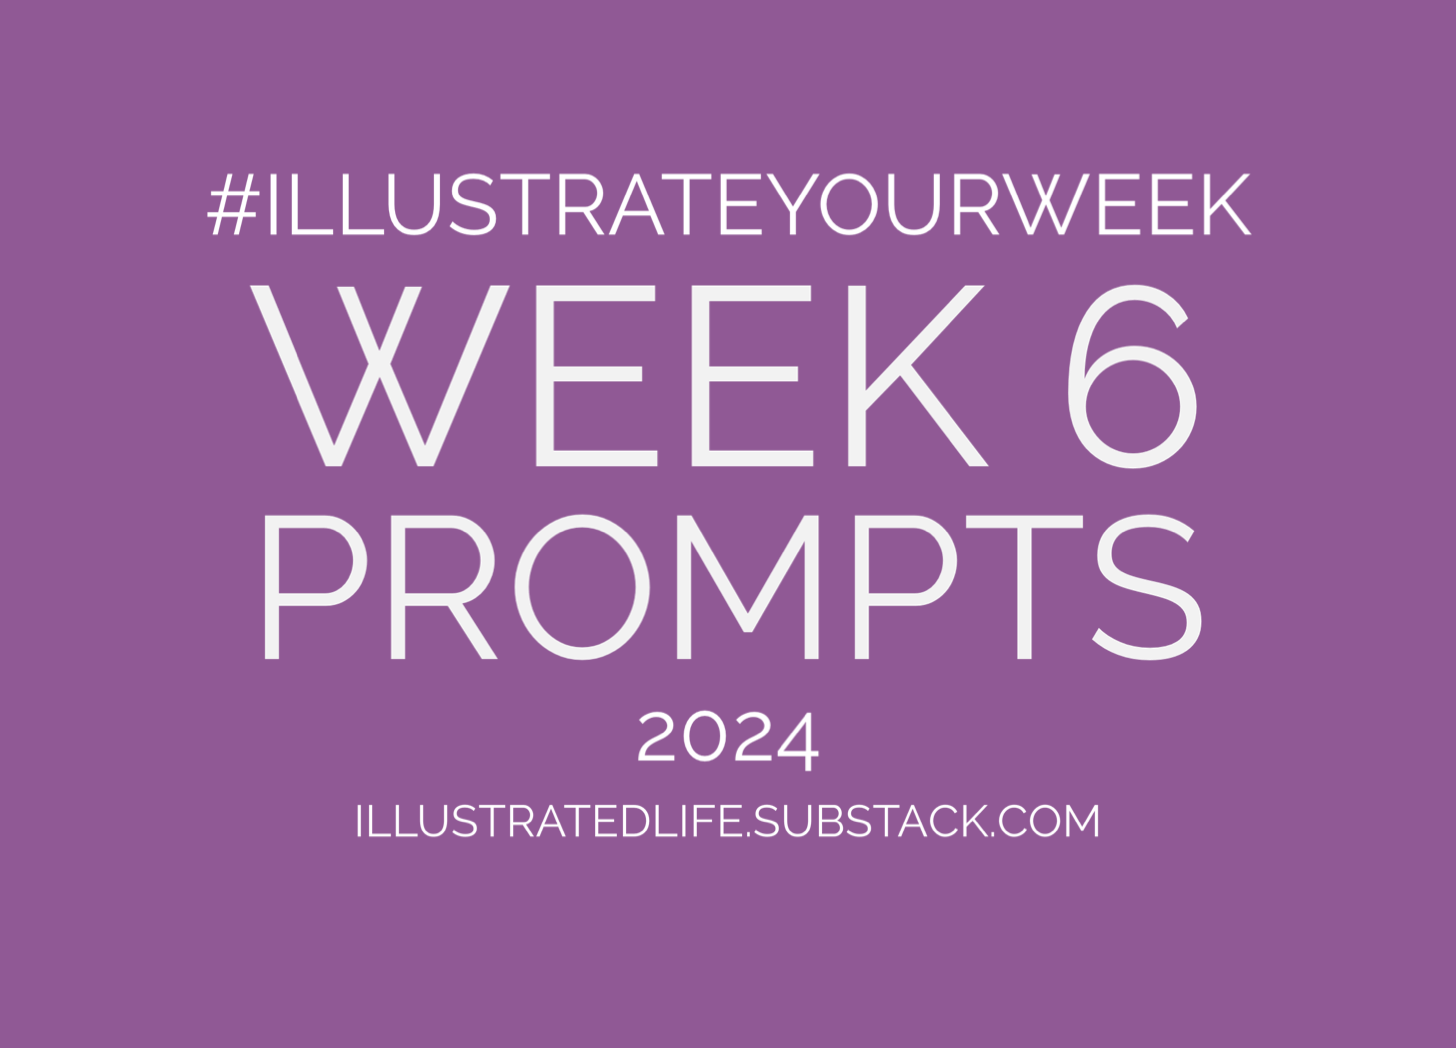 Illustrate Your Week Prompts for Week 6